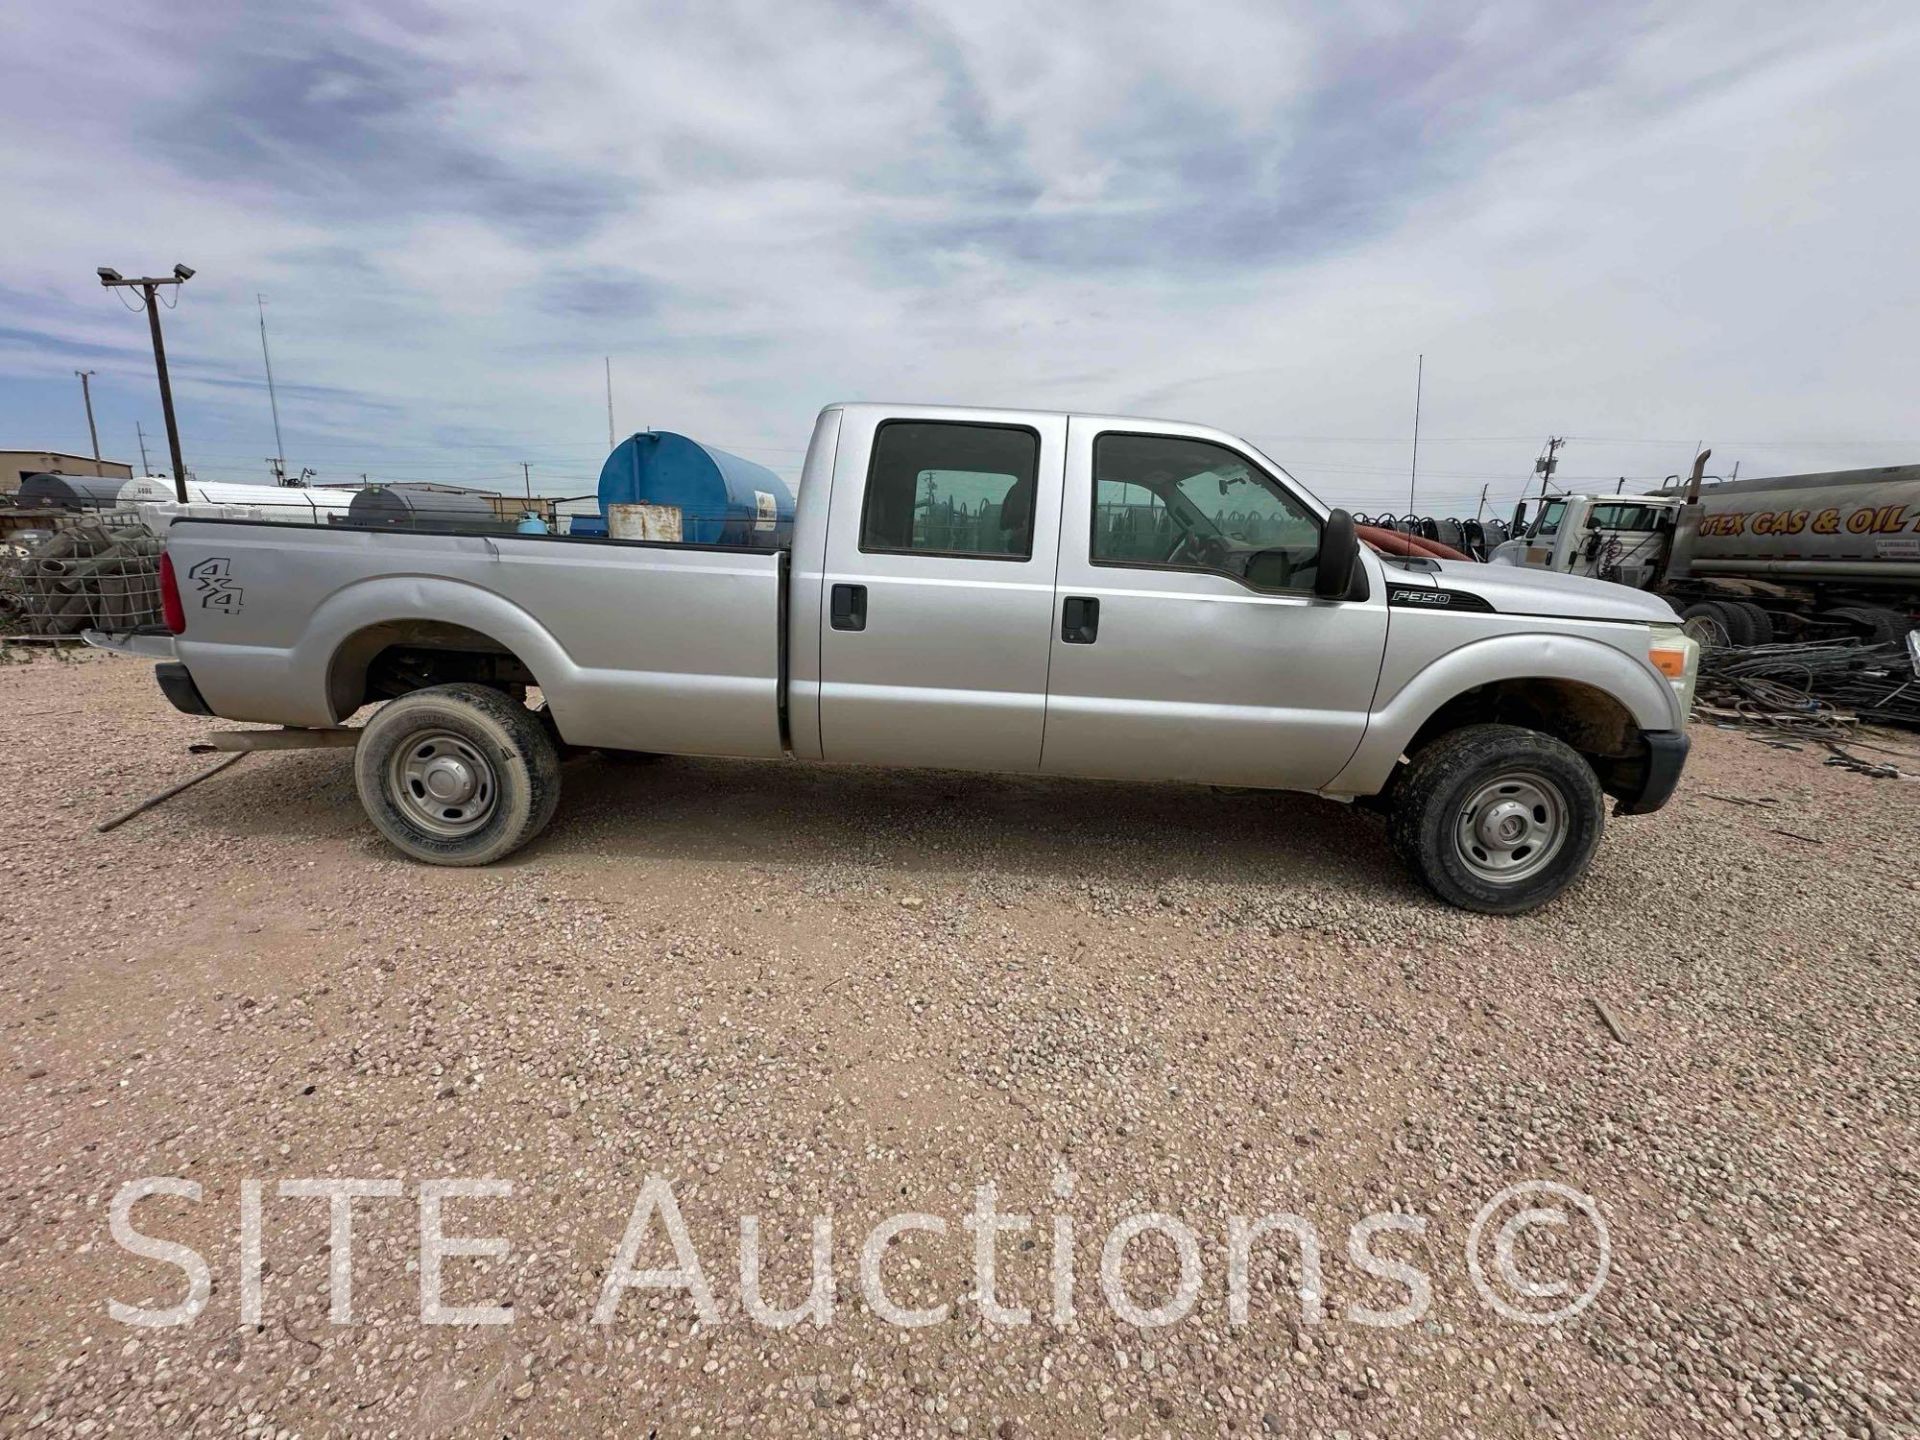 2011 Ford F350 SD Crew Cab Pickup Truck - Image 4 of 9